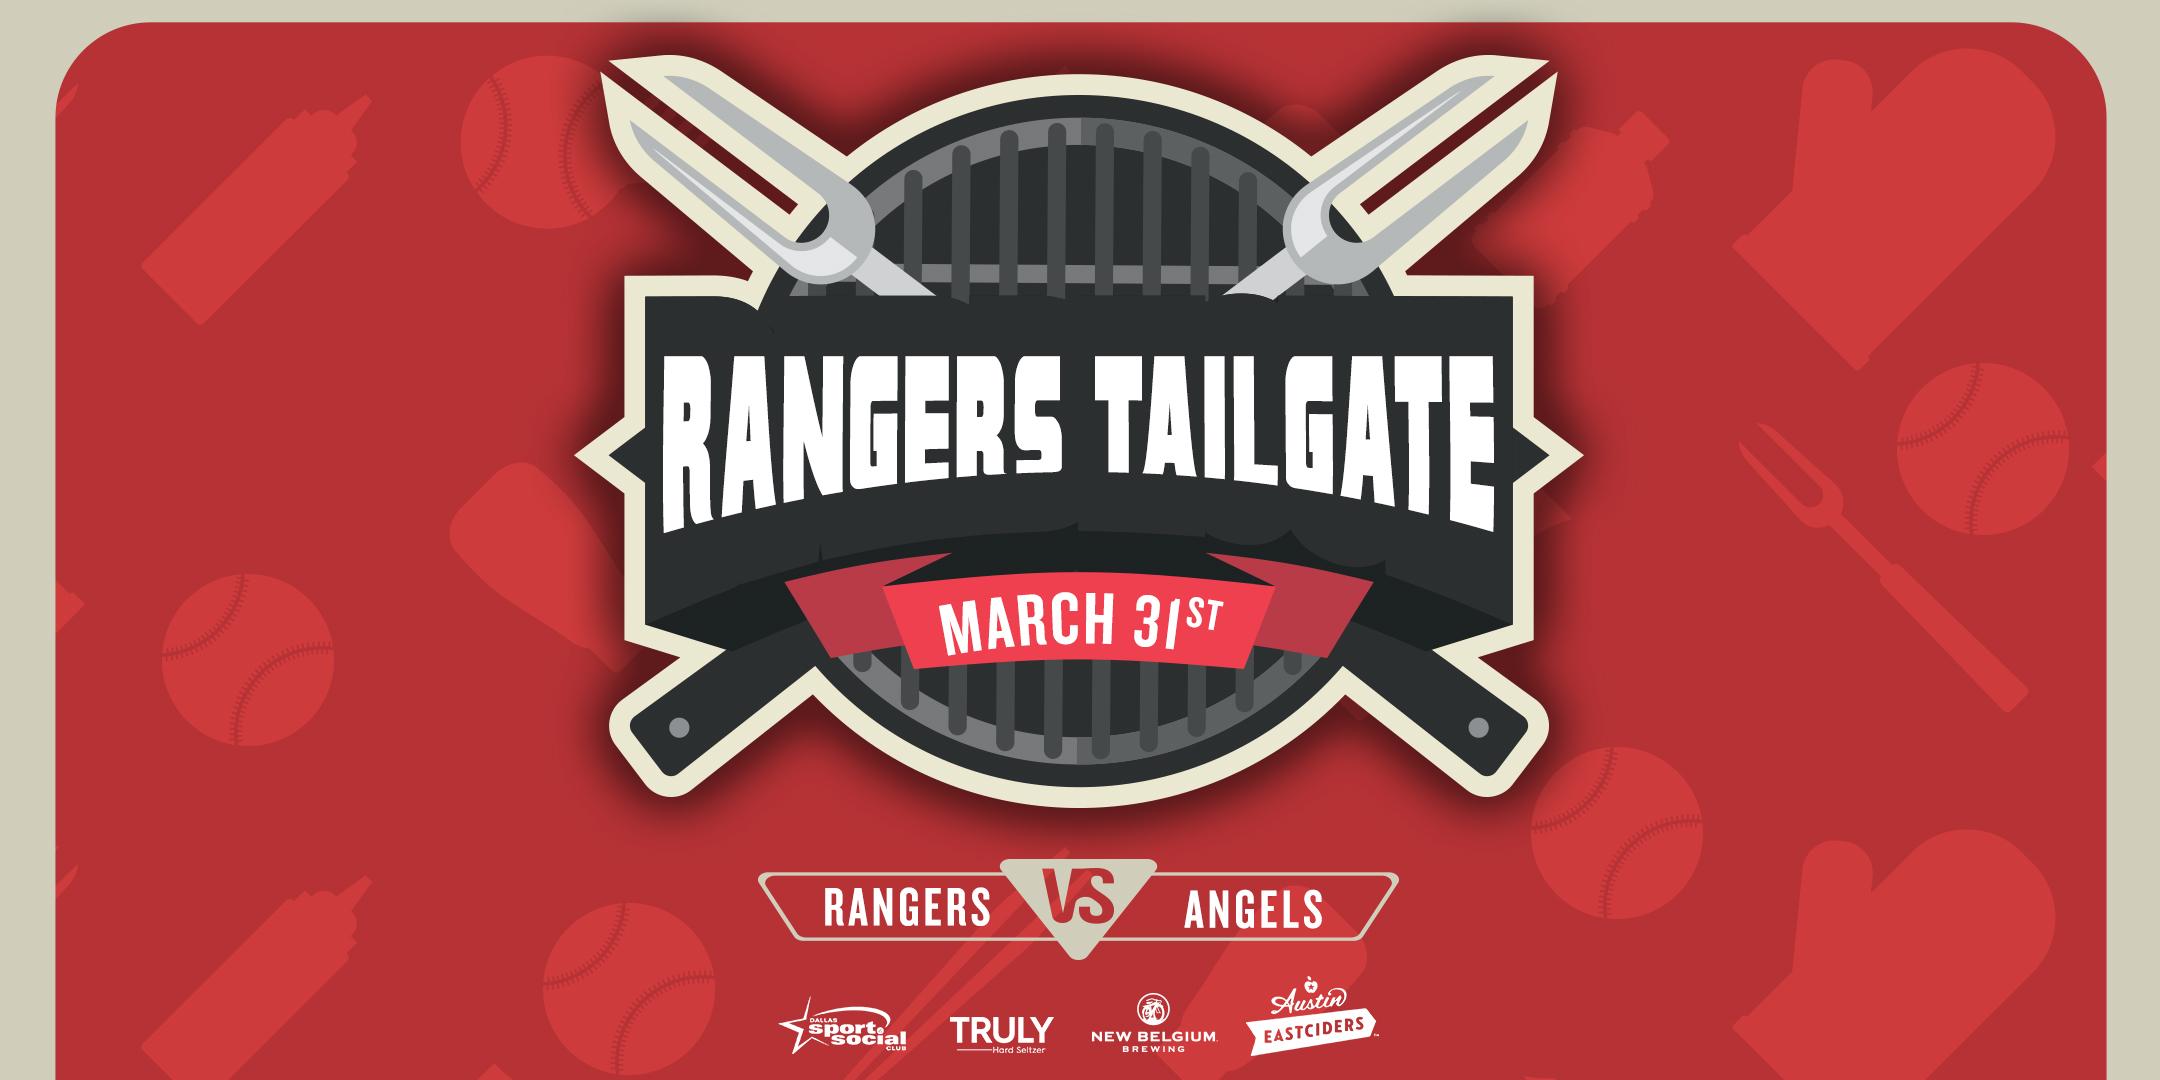 Rangers vs. Angels Opening Day Tailgate at Globe Life Park